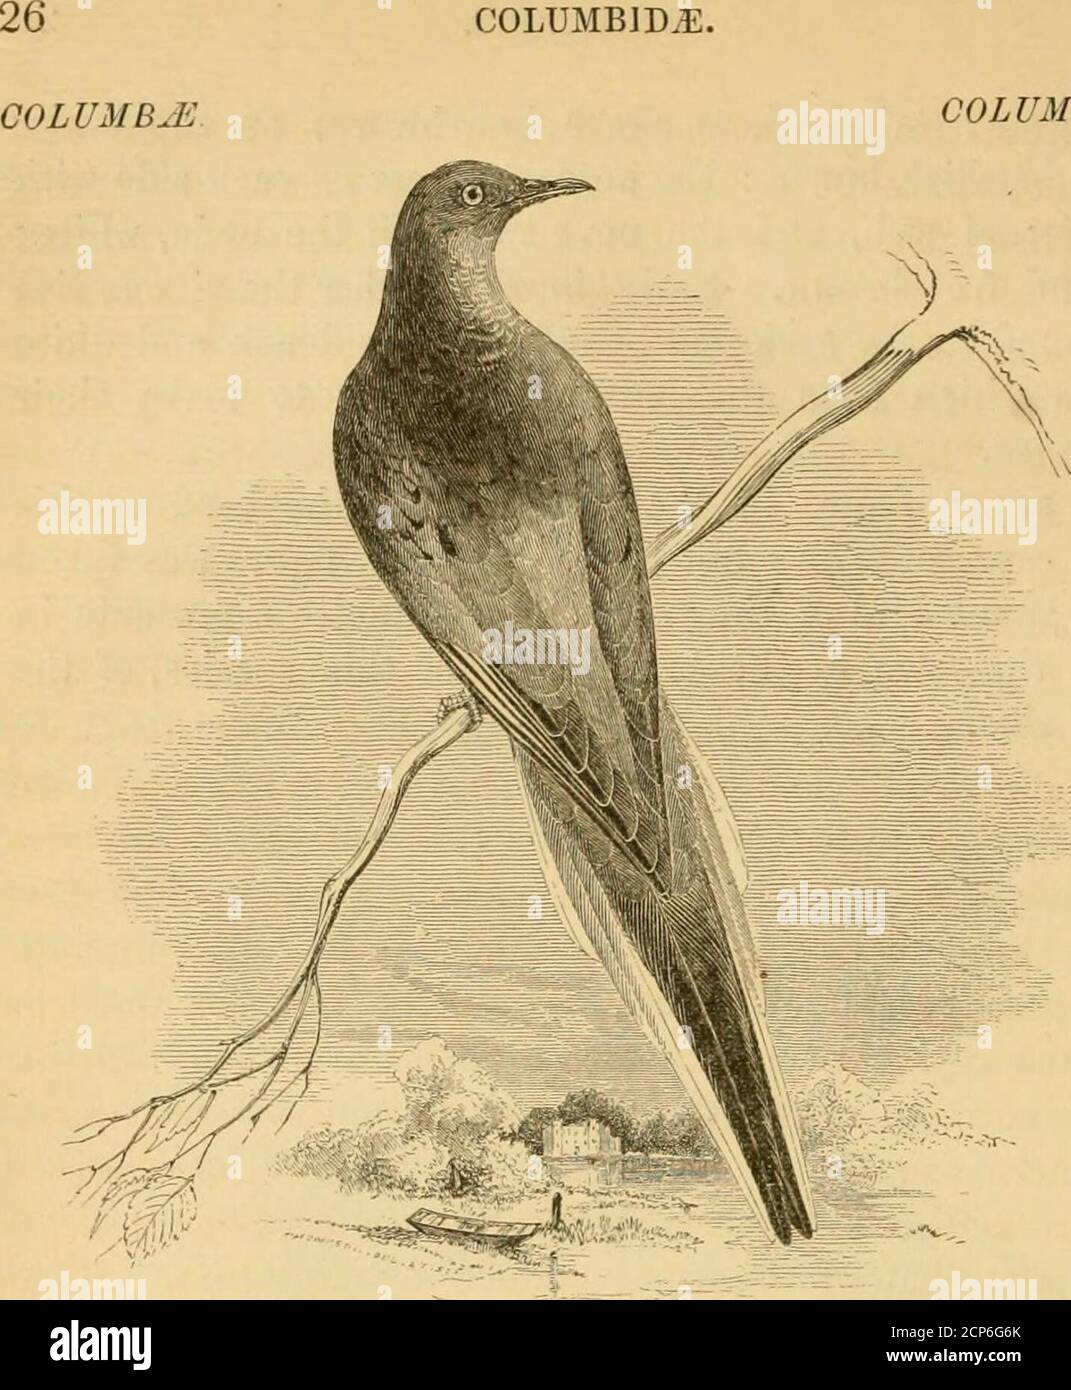 . A history of British birds . VOL. III. COLUMBID.E. COLVMBID^E.. ECTOPISTES MIGRATORIUS (LiunffiUS*). THE PASSENGER PIGEON. Ectojnstes migratorius. EcTOPiSTES, Stoainsonf. Bill small, slender and notched. Wings ratherelongated, pointed ; the second feather longest. Tail very long and extremelycuneate. Tarsi very short, half-covered anteriorly by feathers; anteriorscales imbricate ; lateral scales small and reticiilate. The American Passenger Pigeon was included in the firstEdition of this work on the strength of the occurrence of asingle specimen recorded by Dr. Fleming in his * Historyof Bri Stock Photo